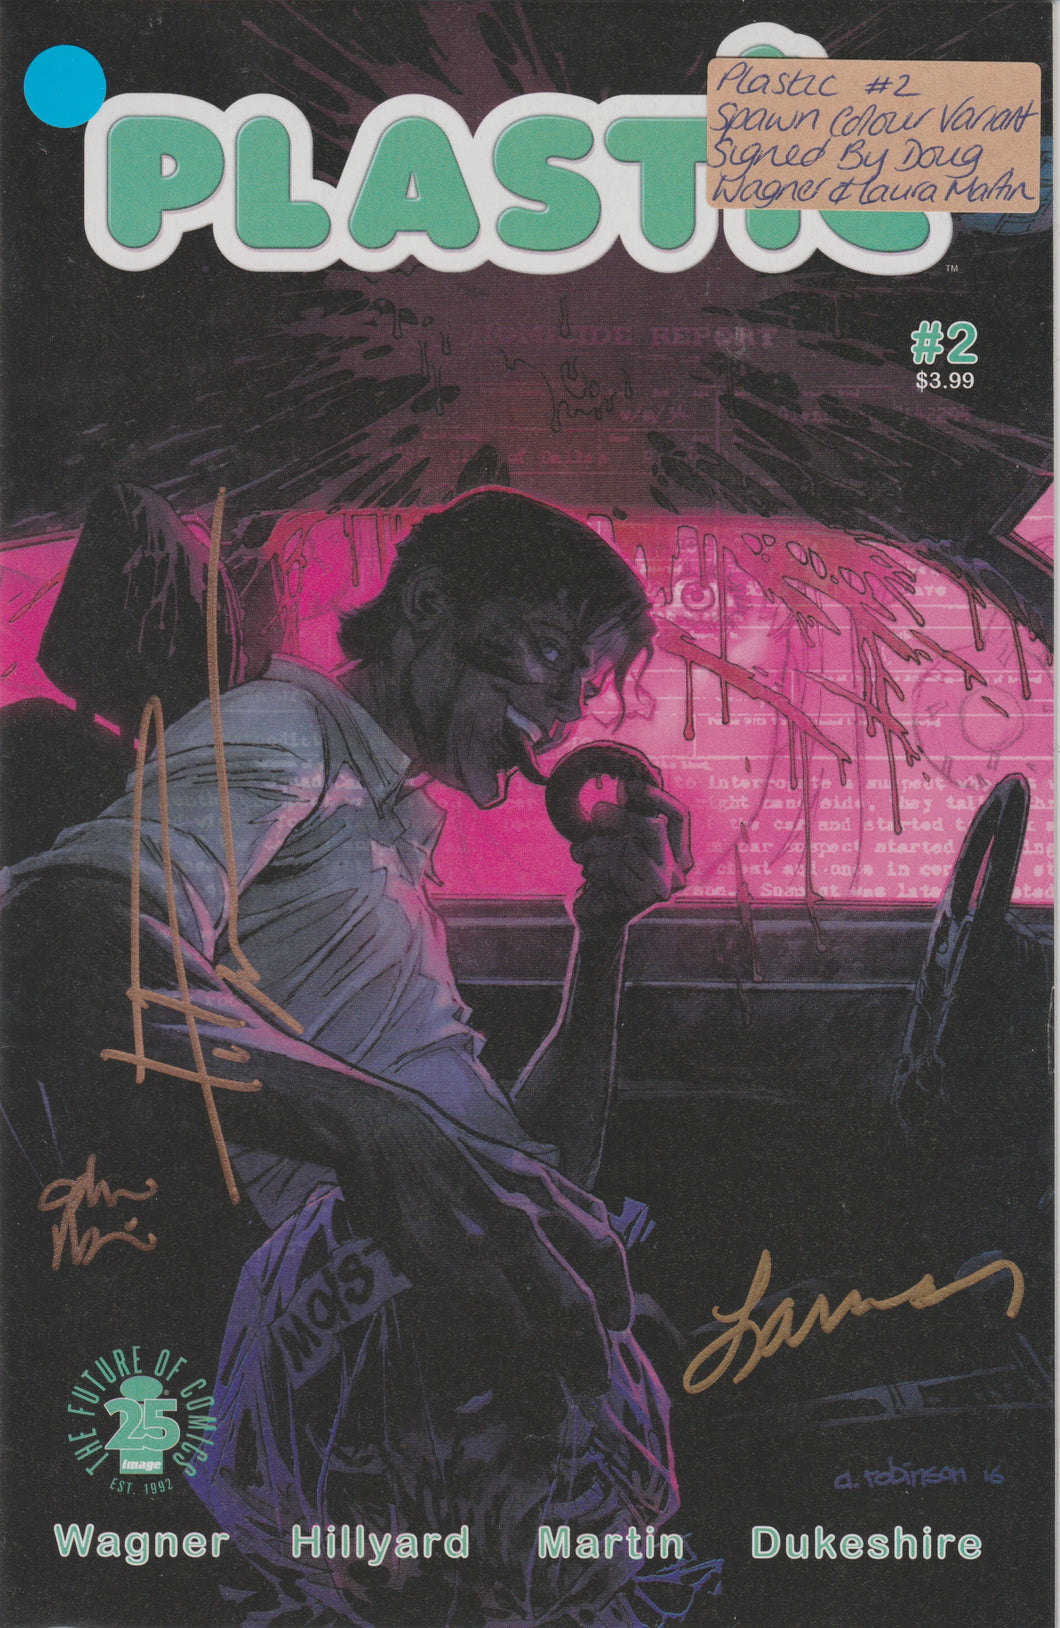 Plastic 2 (variant) 2 signed by Doug Wagner, Laura Martin and Andrew Robinson